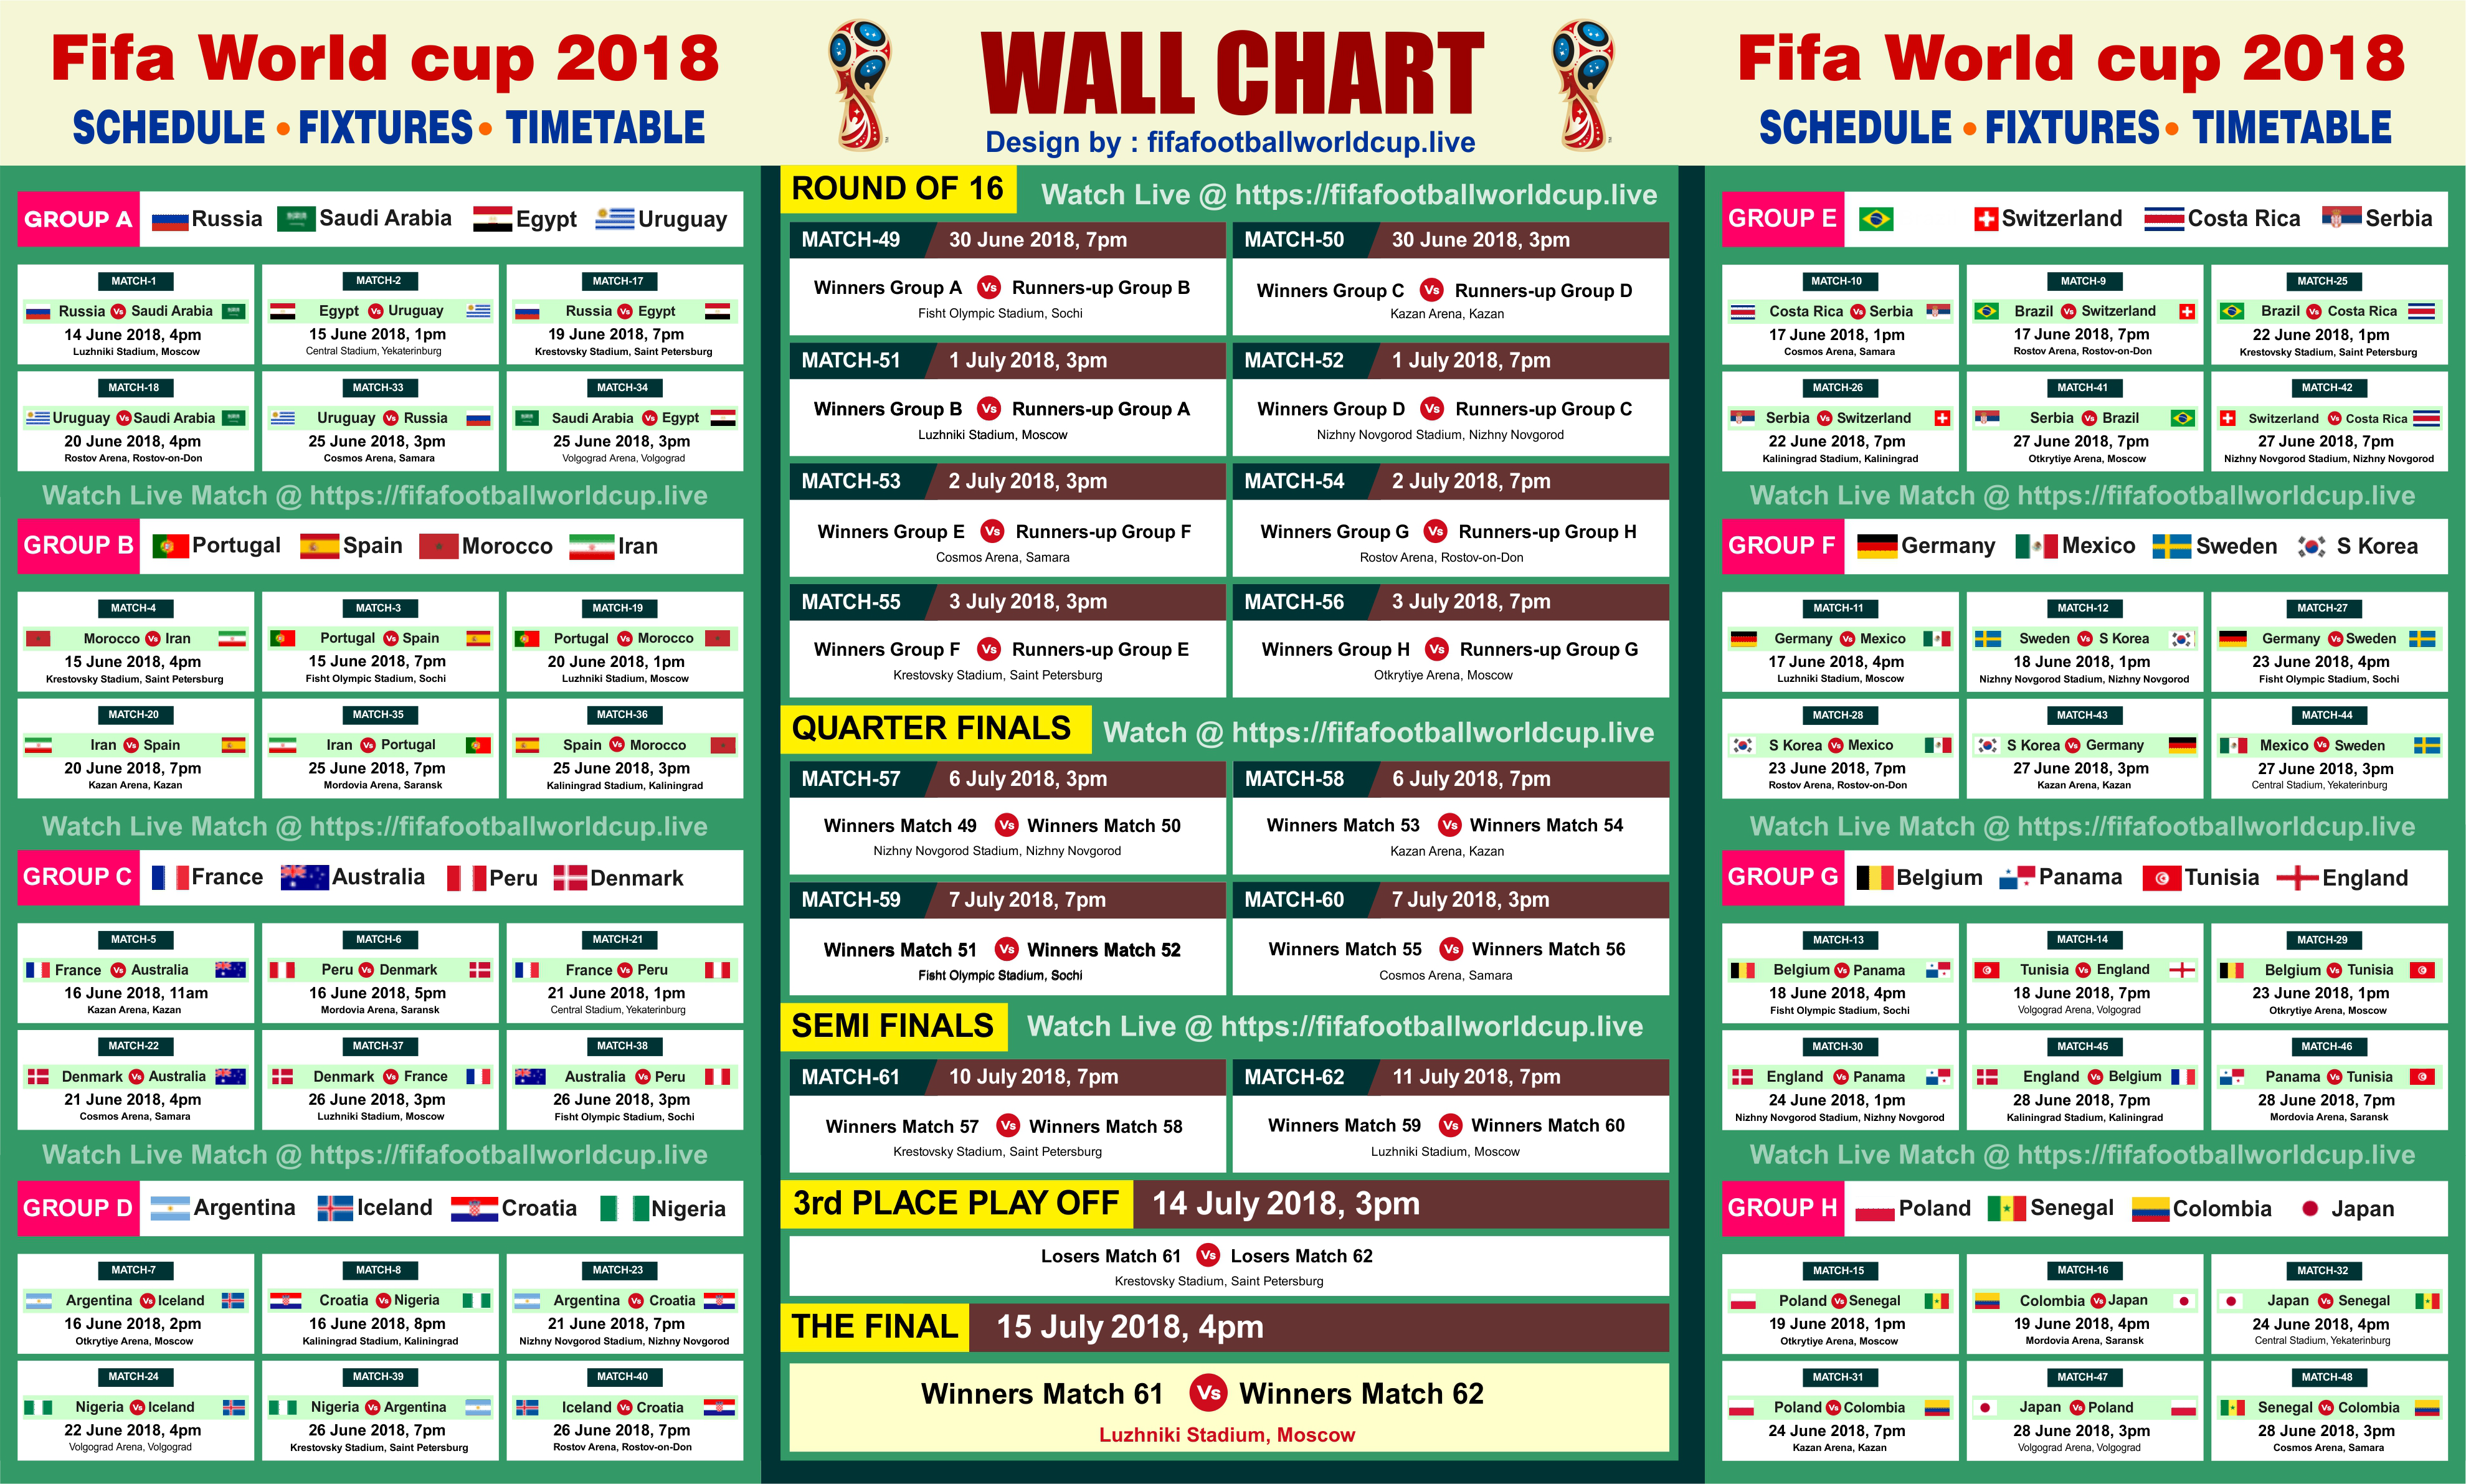 Printable-Fifa-World-cup-2018-Schedule-in-Eye-Catche-Design.png